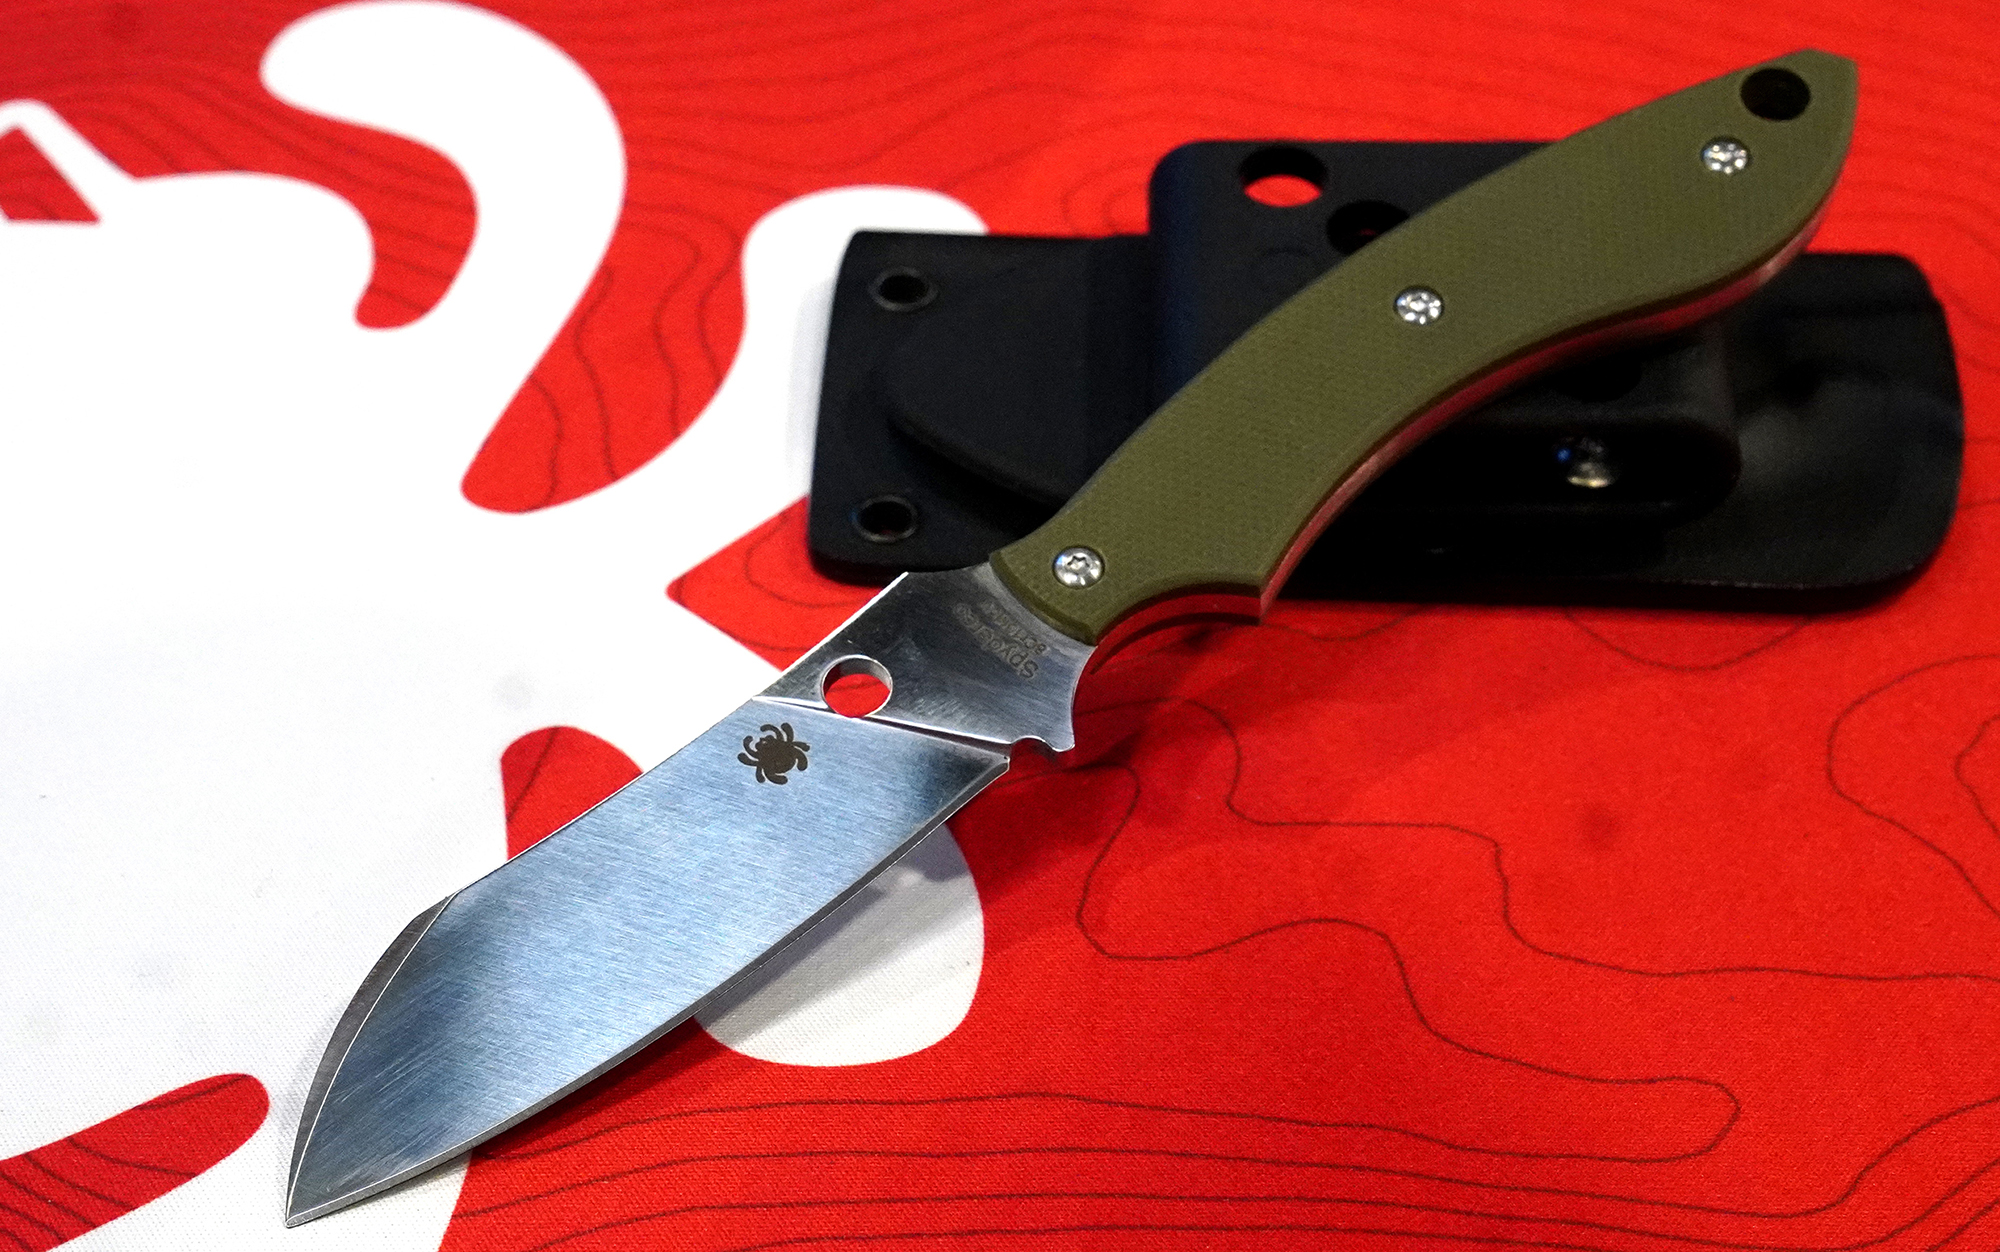 The Spyderco STOK is new at SHOT Show 2023.